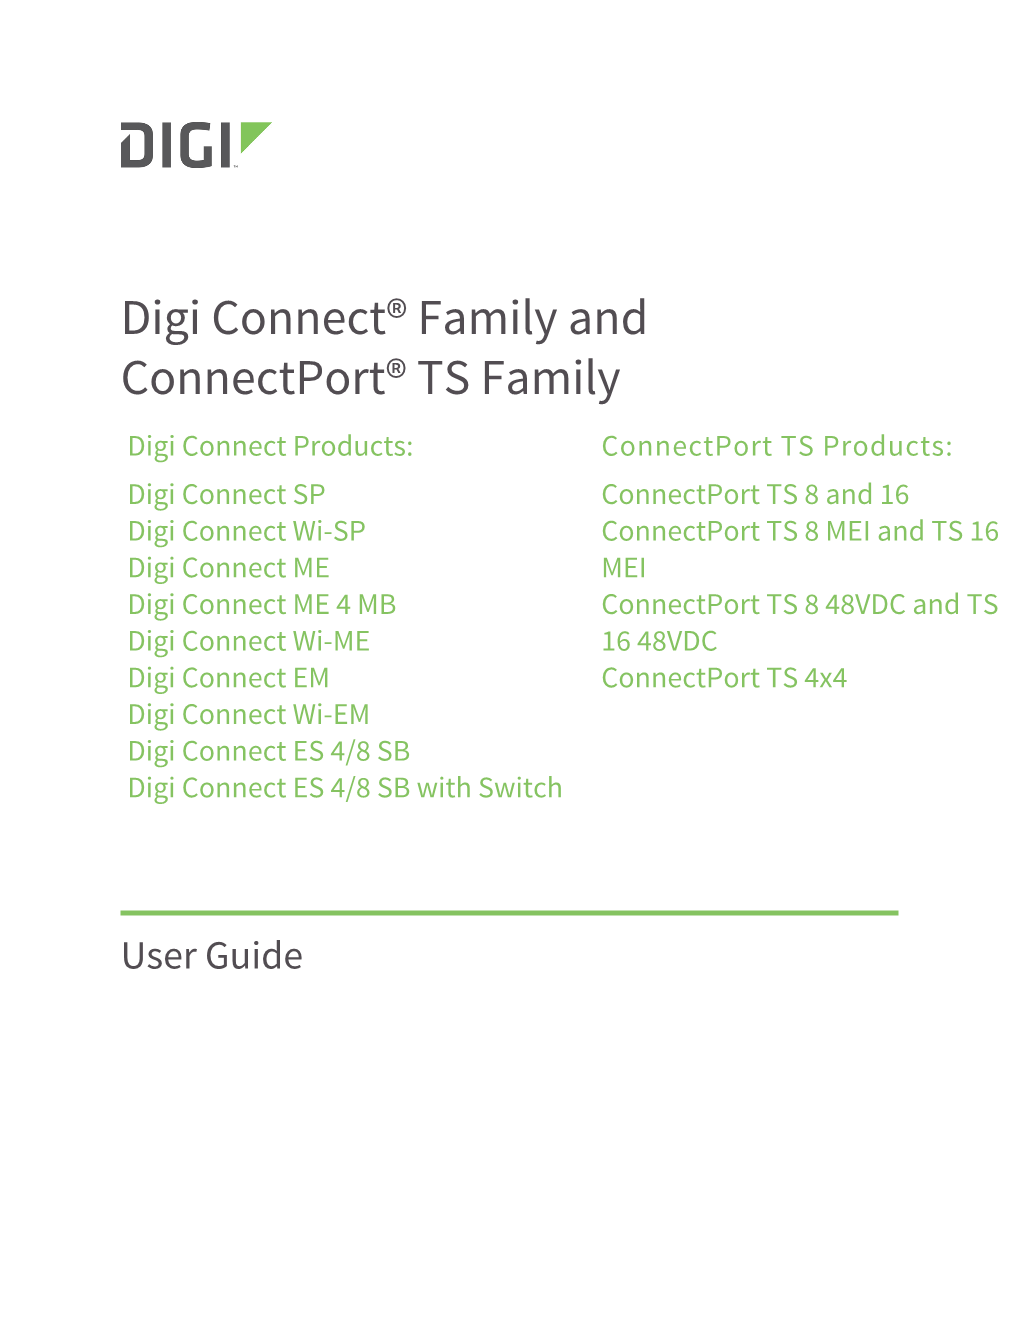 Digi Connect Family and Connectport TS Family User's Guide